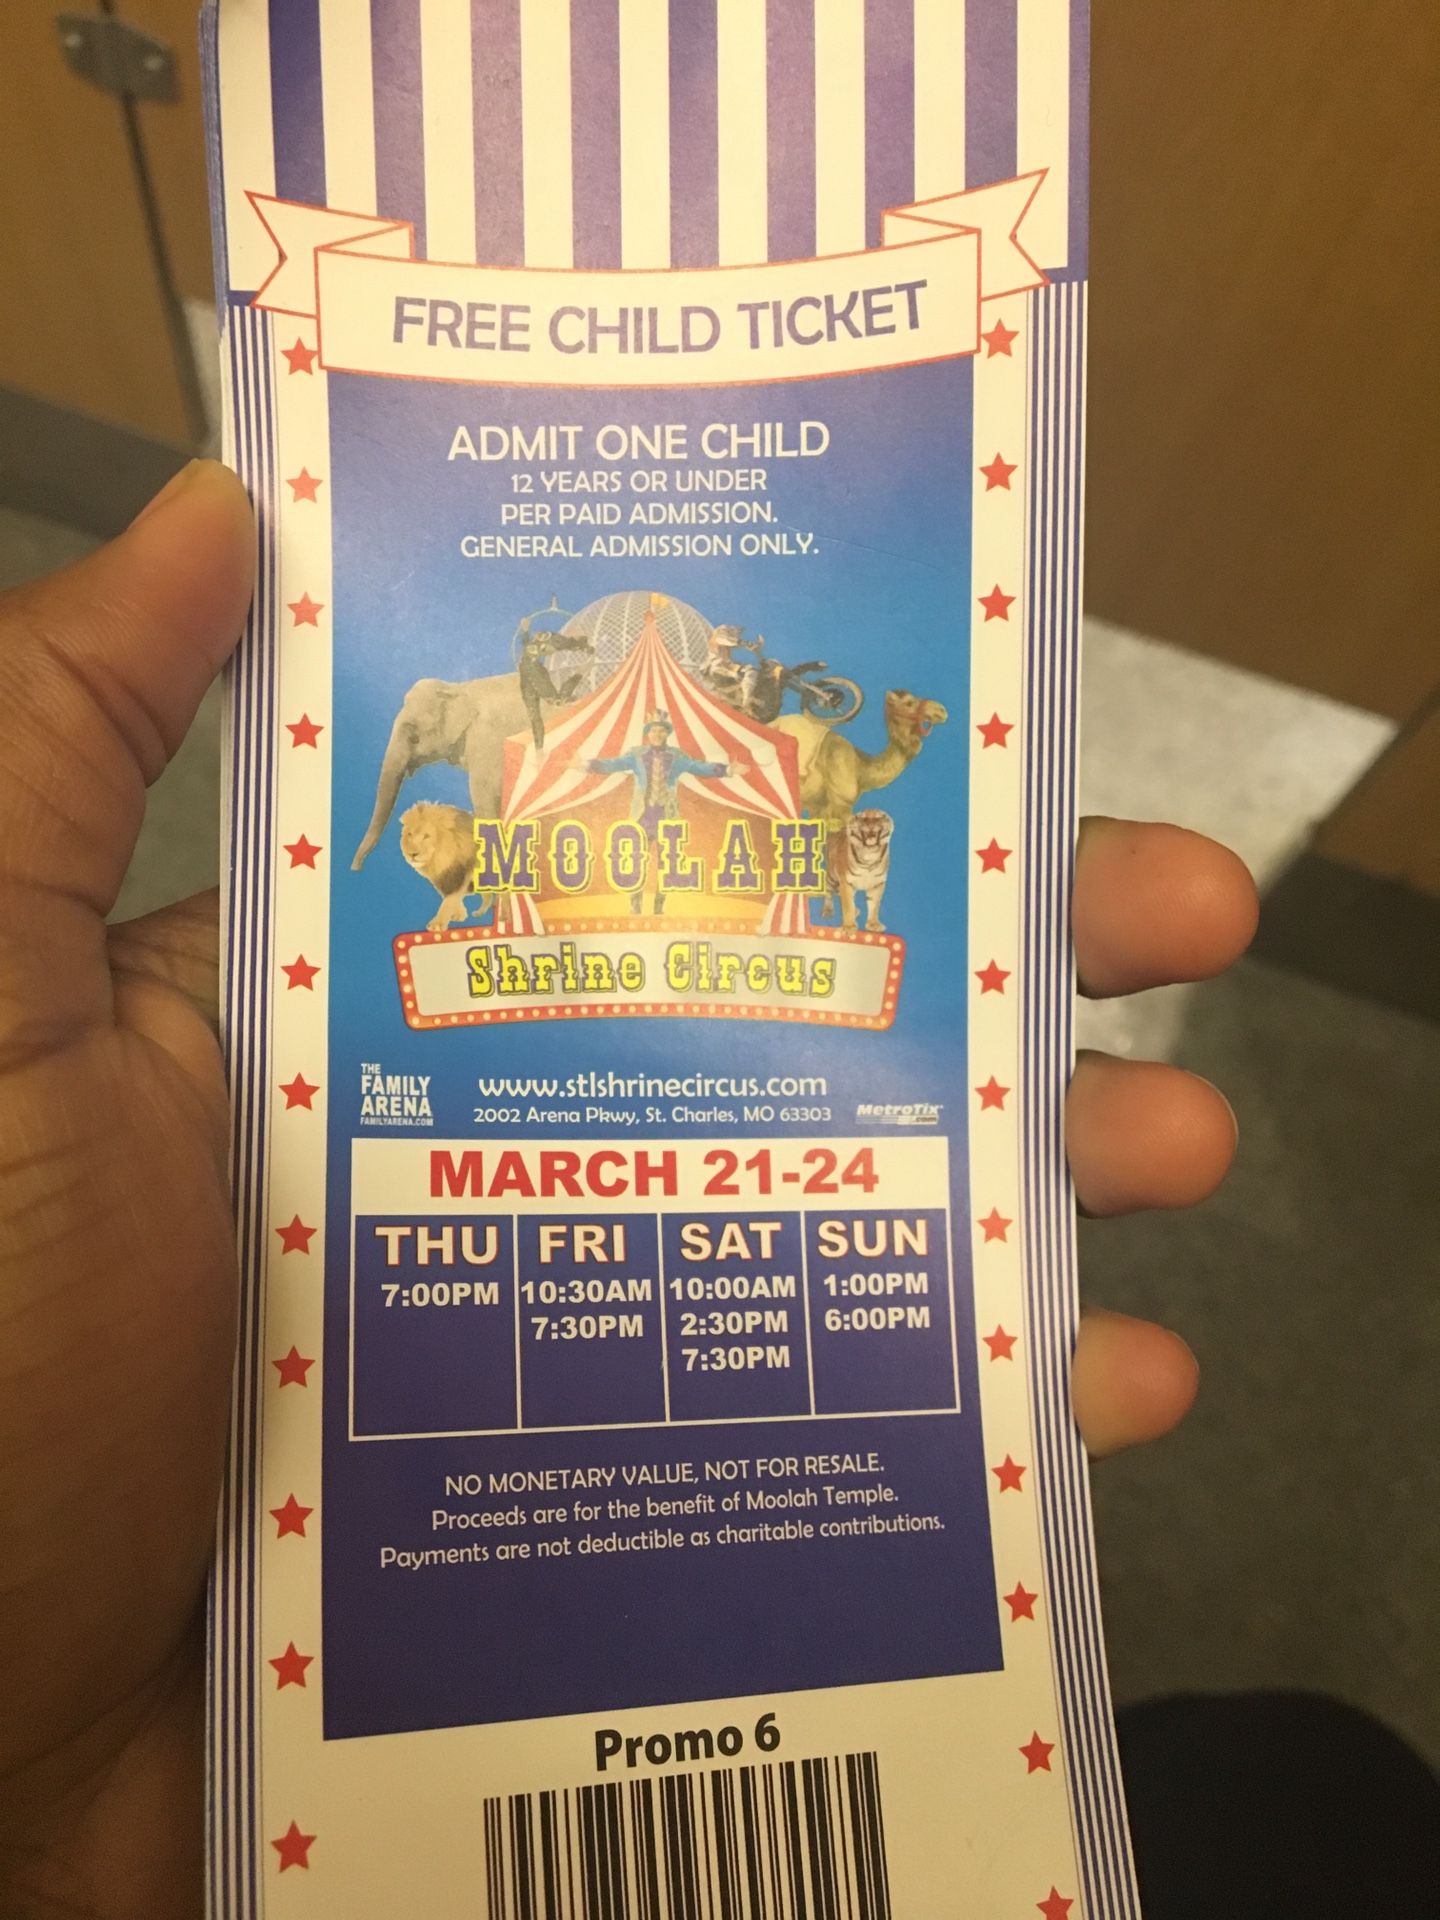 16 Free Kids Circus Tickets for sell !!!